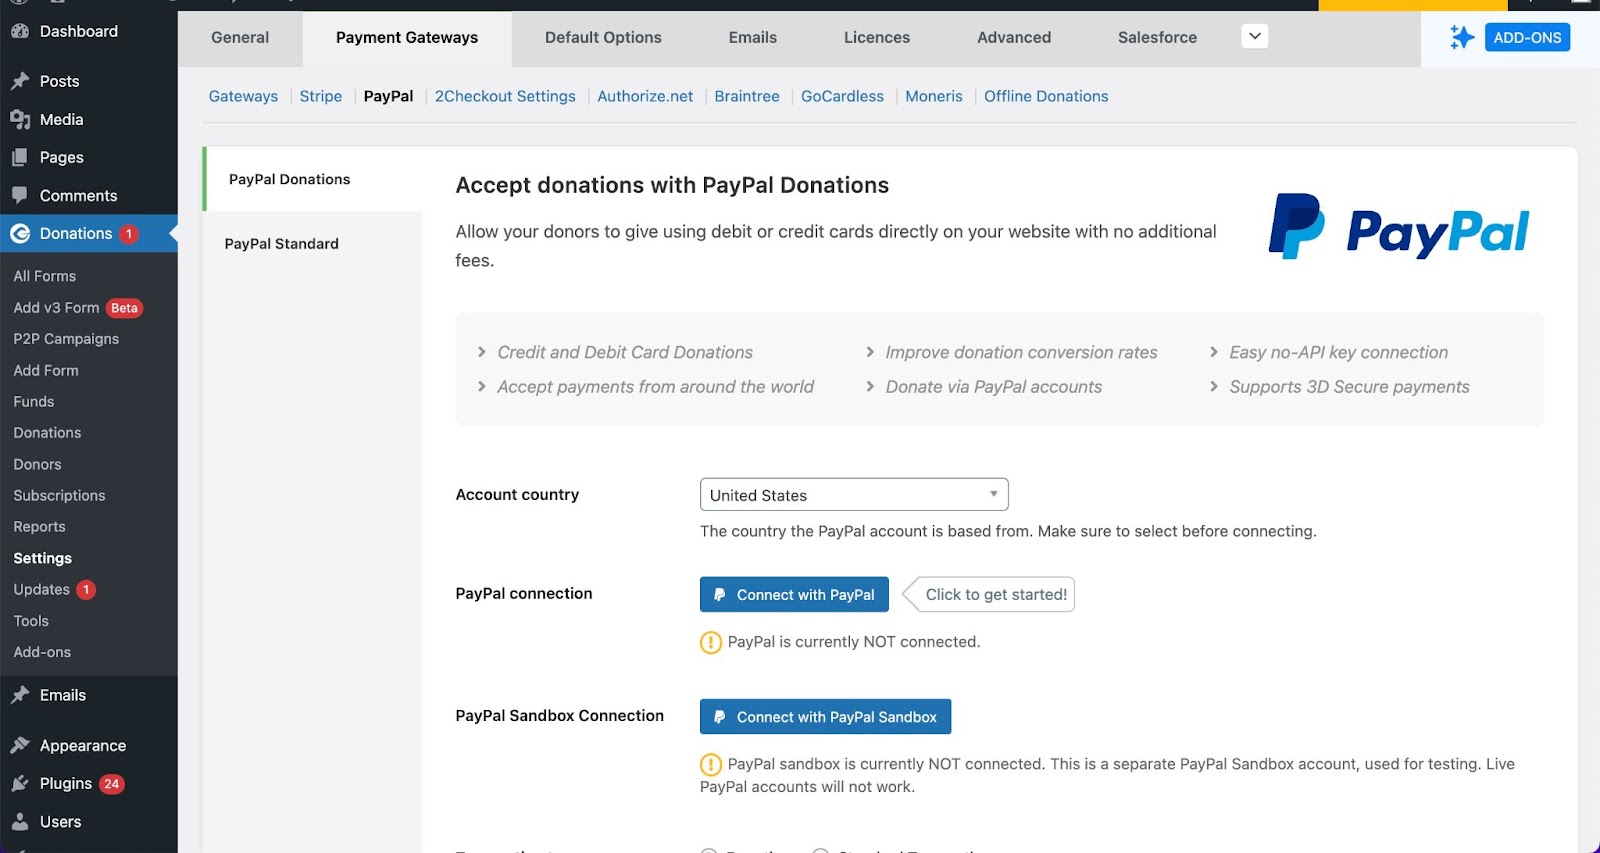 Connect to PayPal directly from within the GiveWP settings.